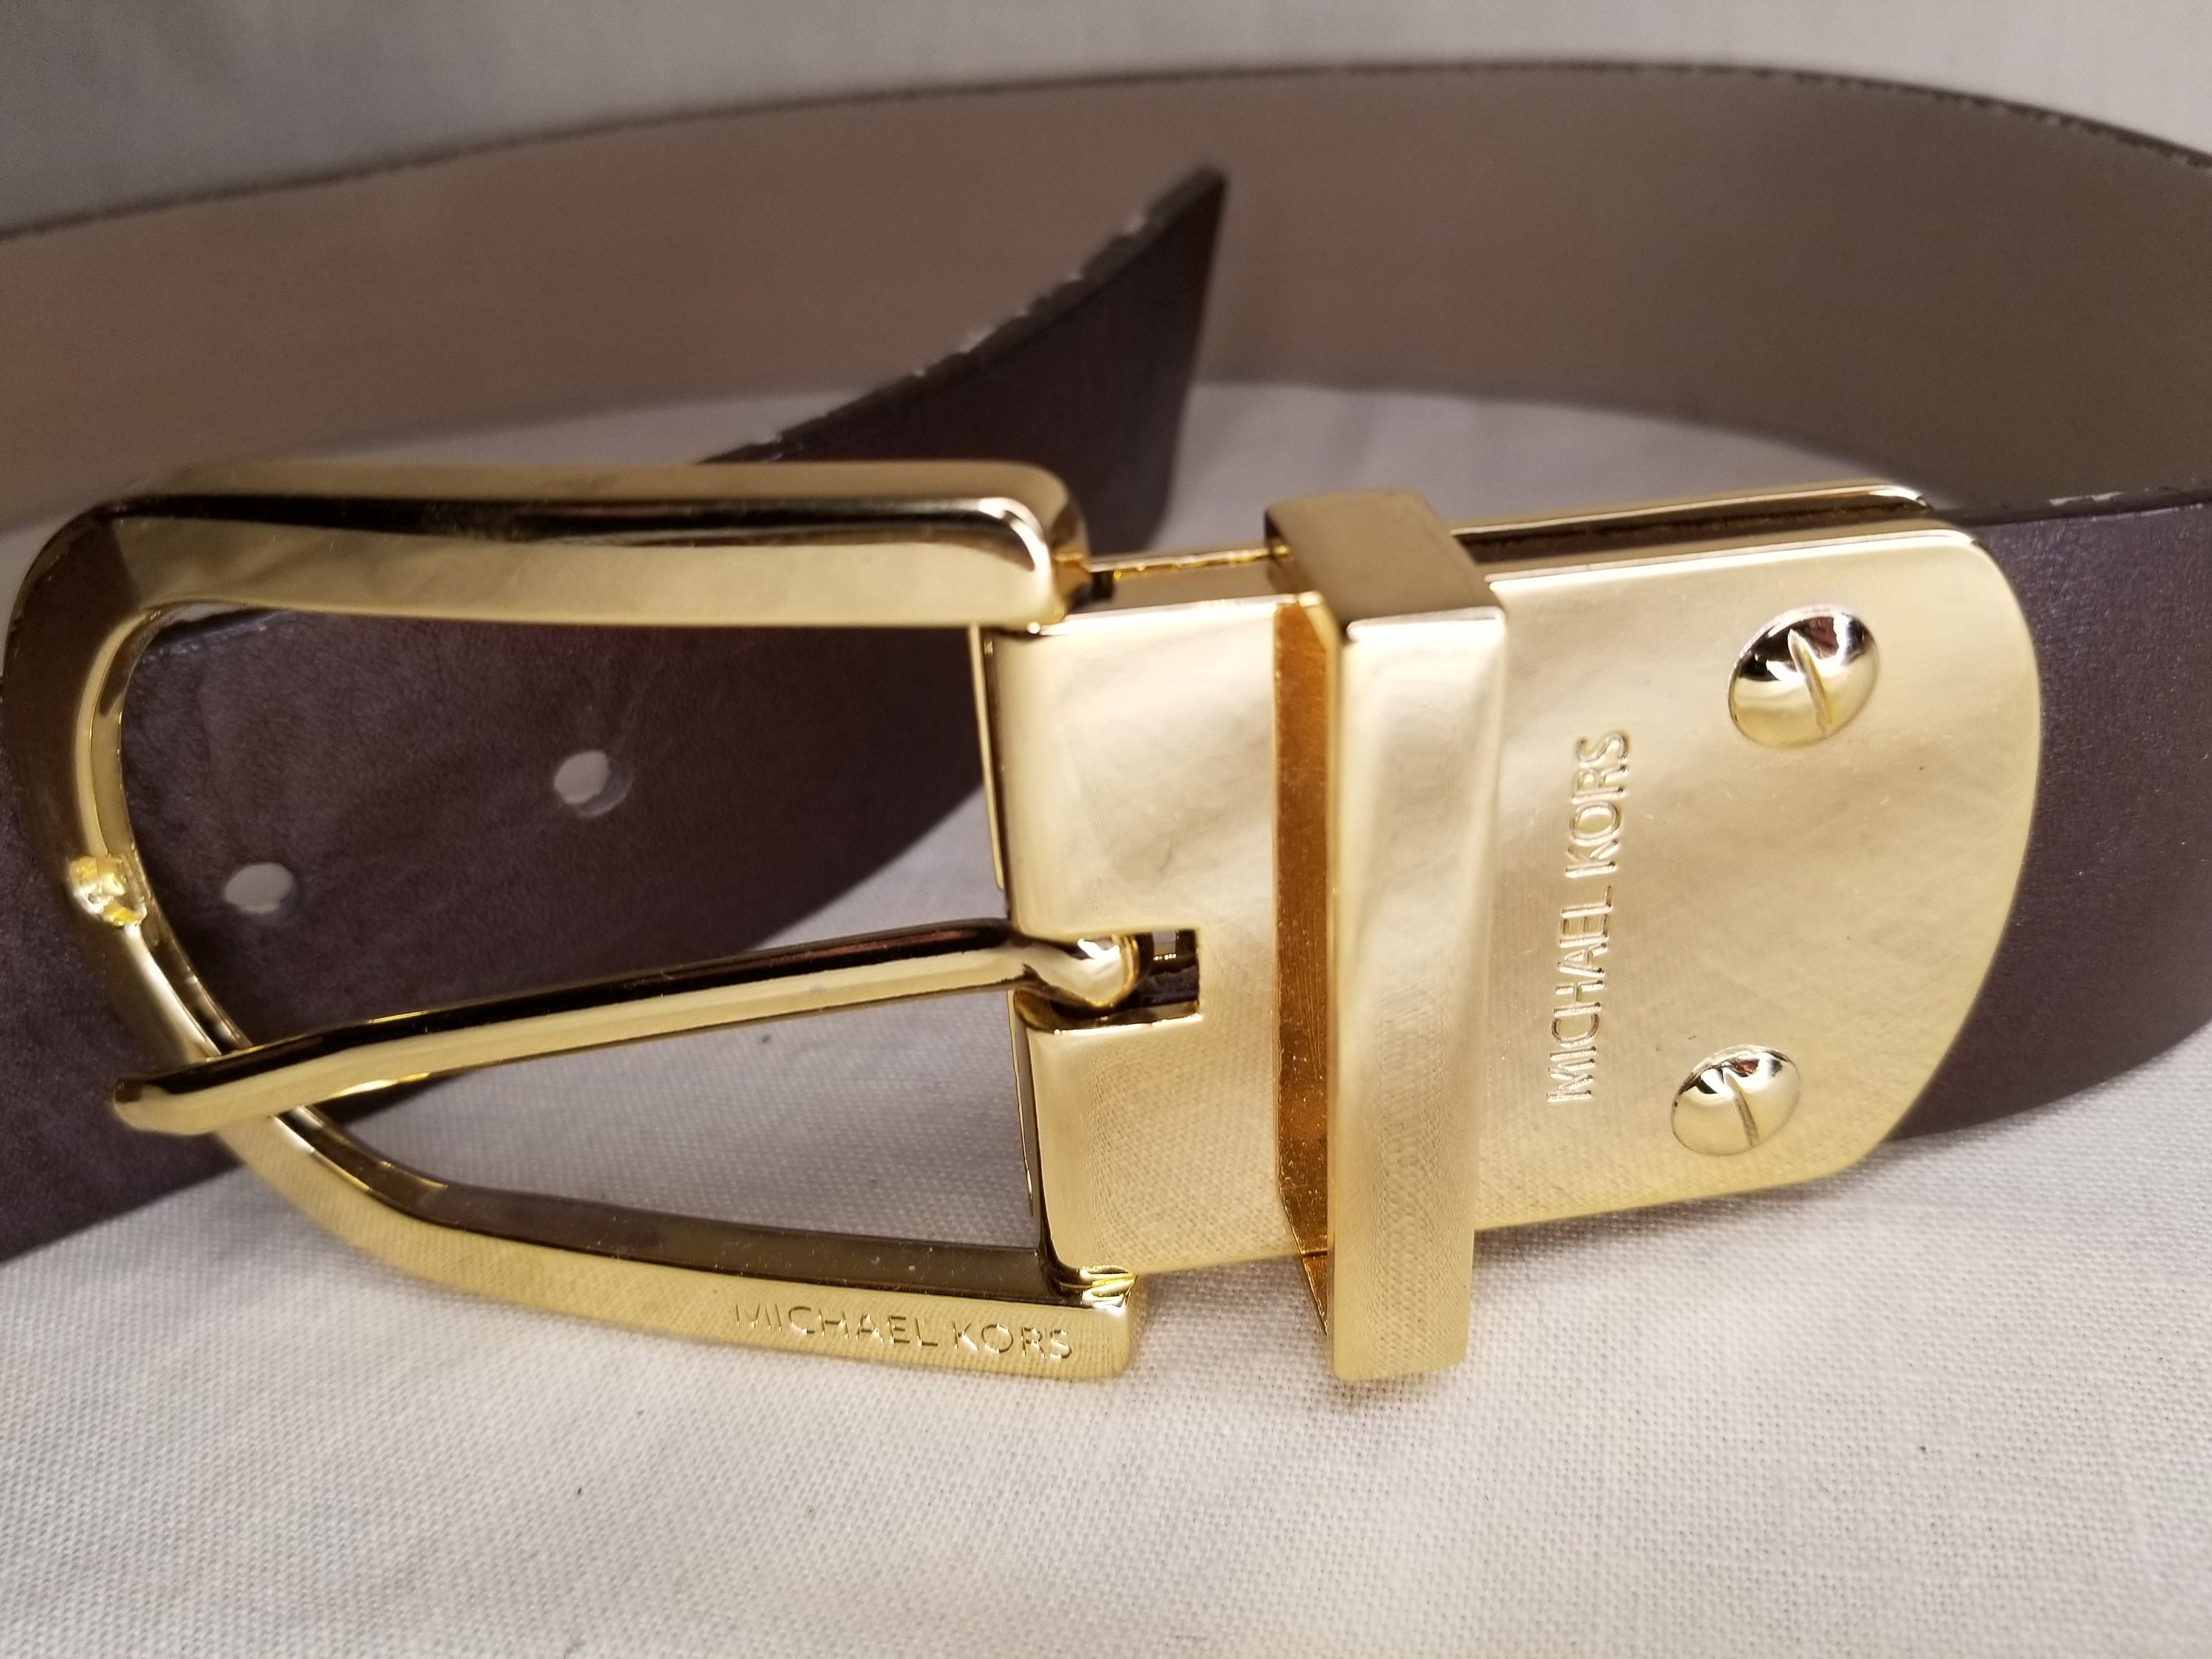 MICHAEL KORS Silver Chain Belt Lobster Claw Clasp